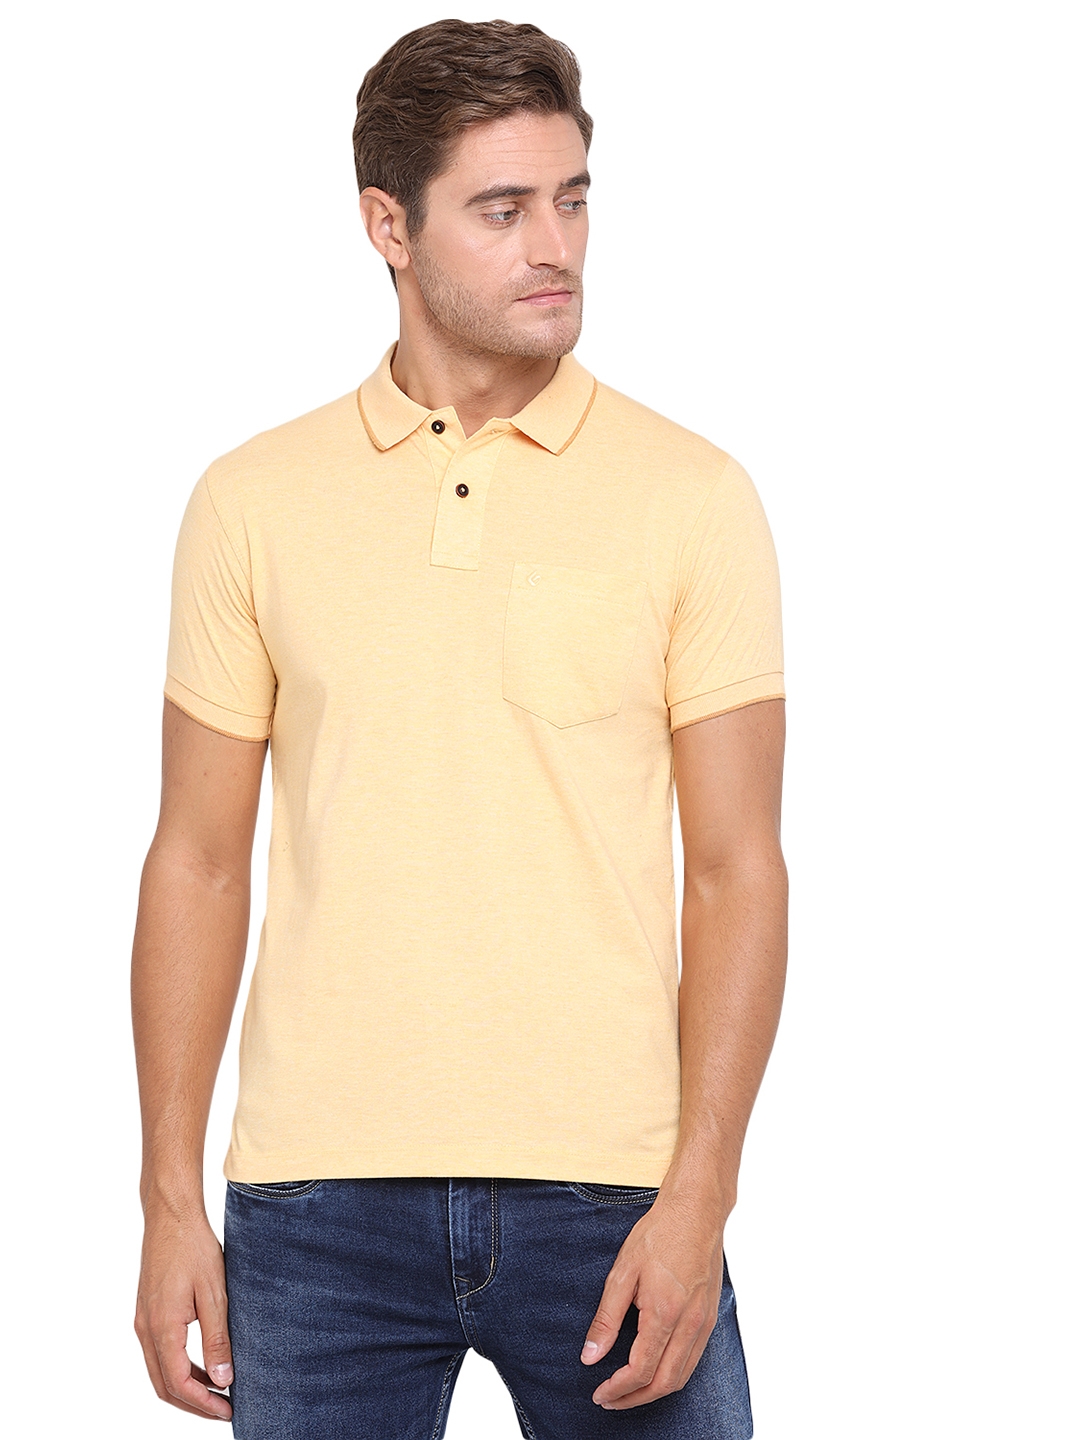 Greenfibre | Light Yellow Solid Slim Fit Polo T-Shirt | Greenfibre 0